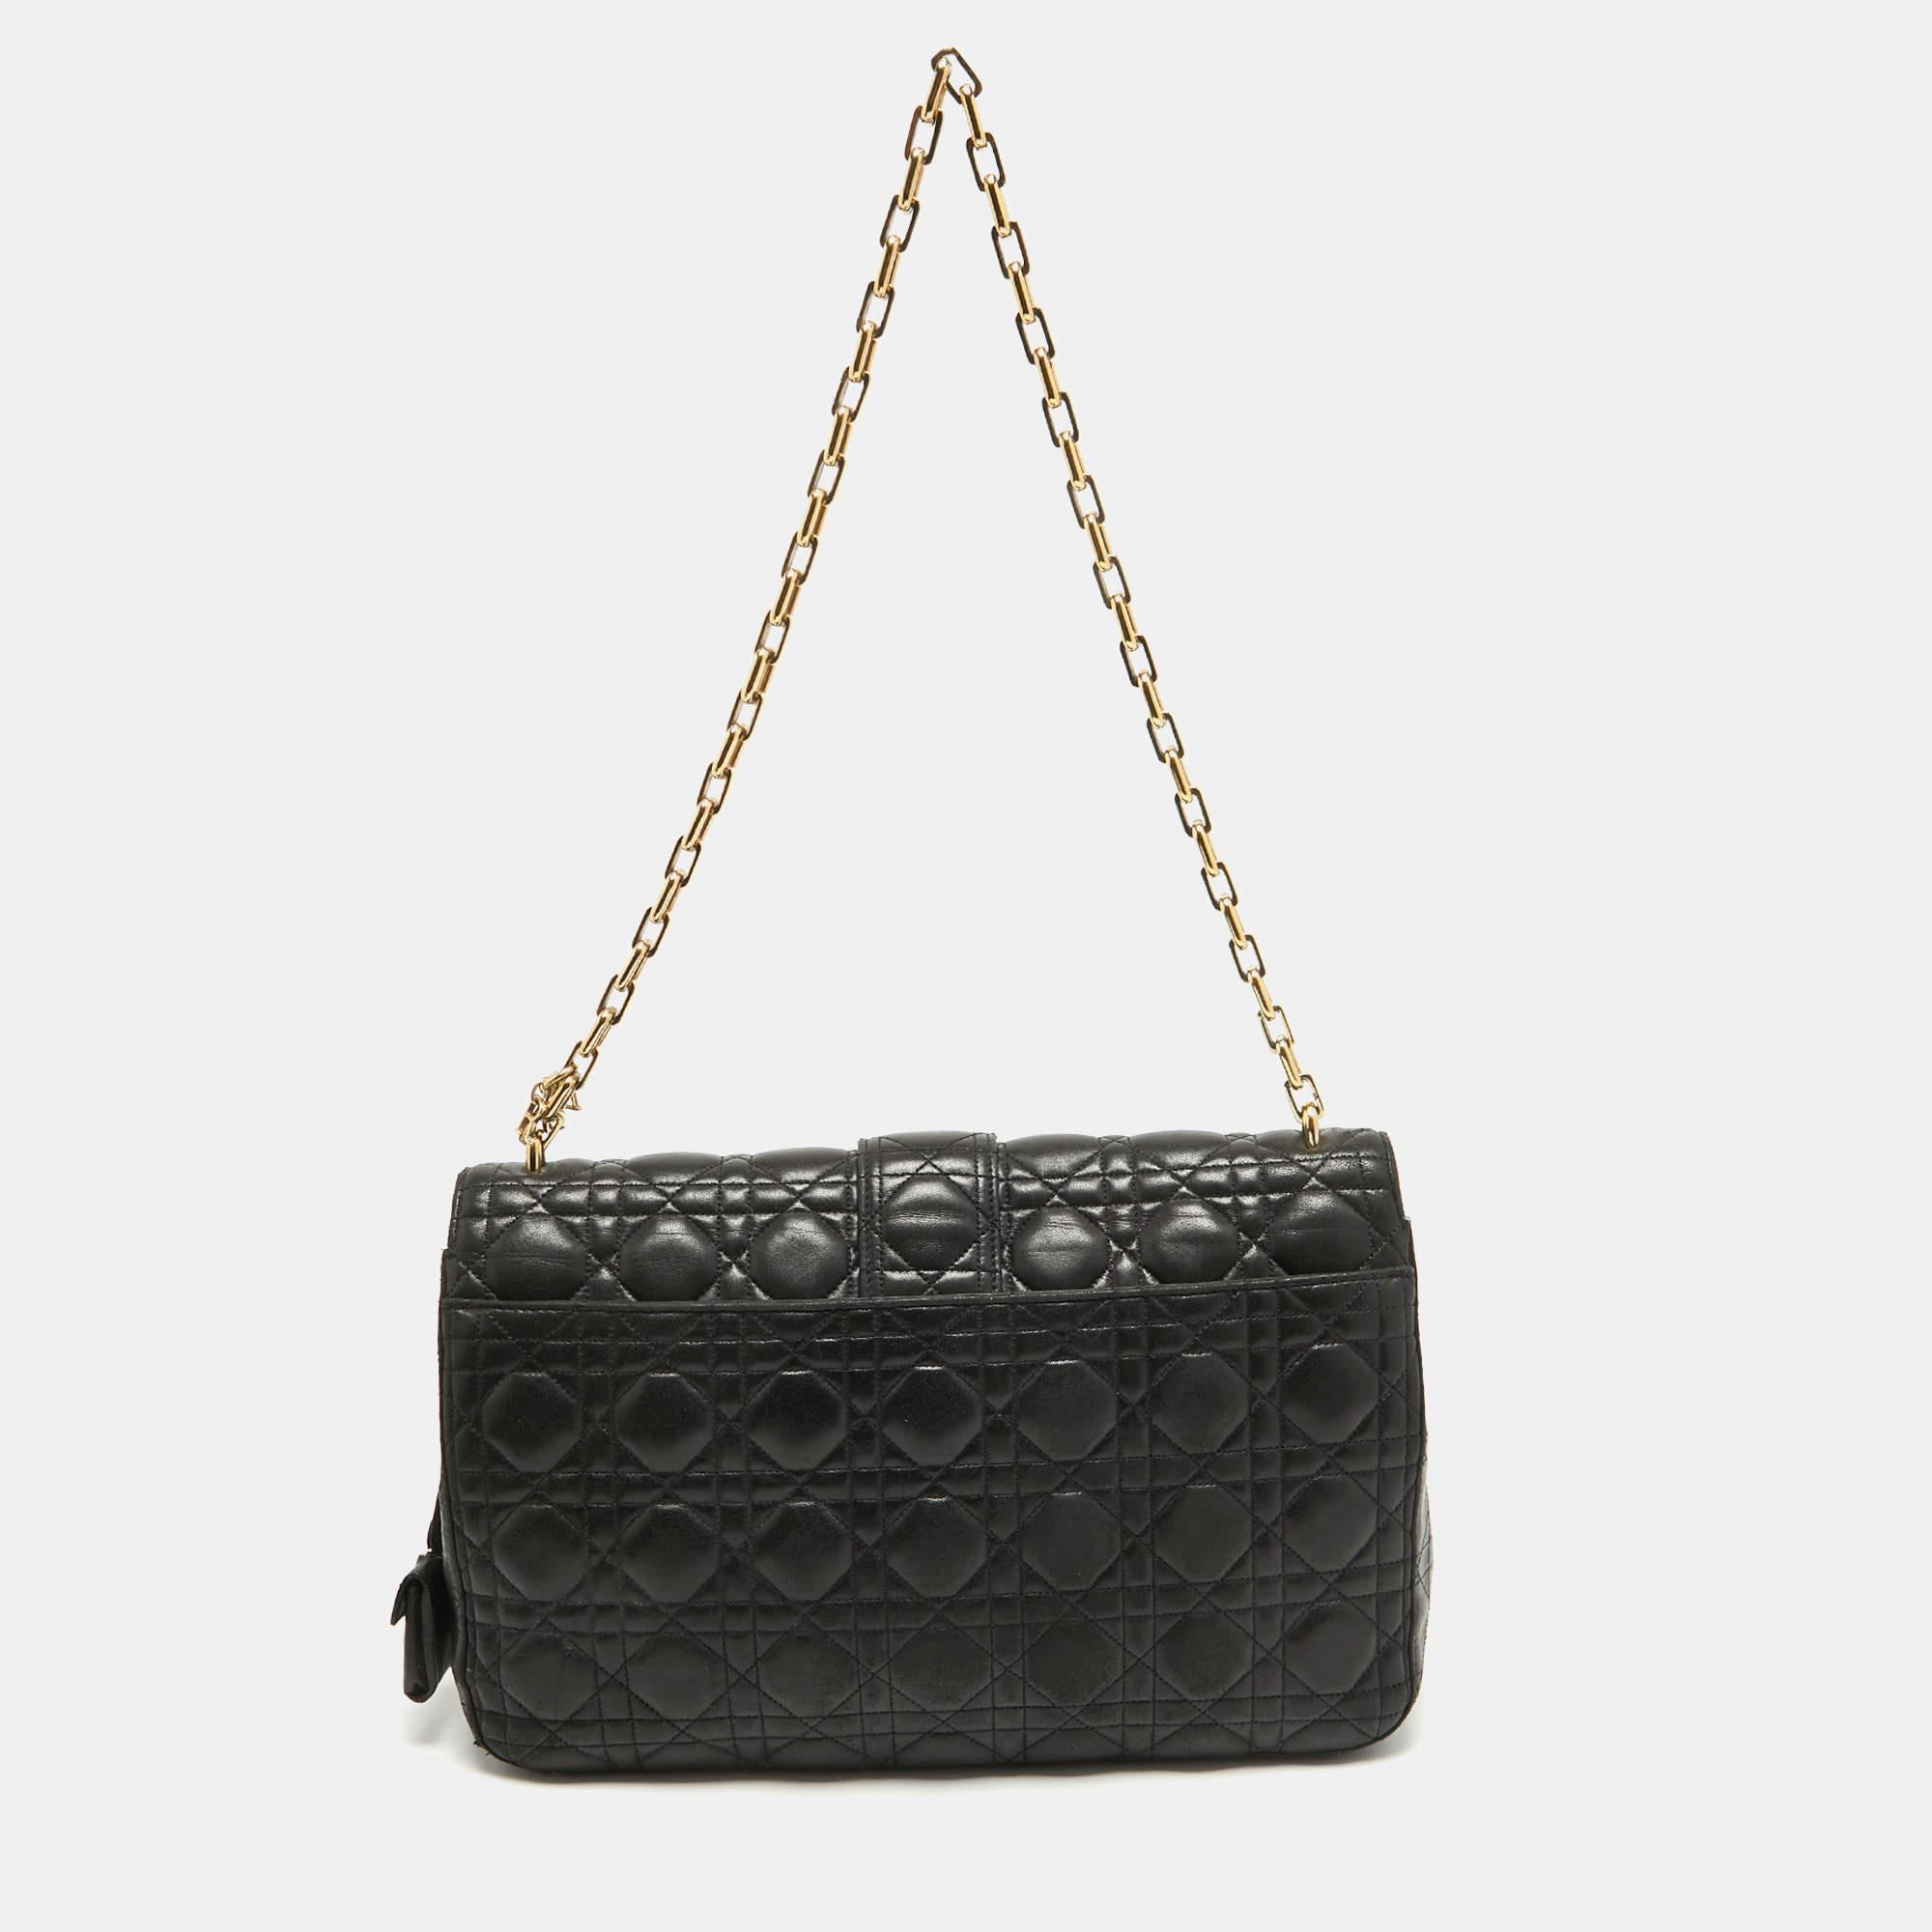 This Miss Dior bag by Dior, with its luxurious design, will be a favorite. Crafted from leather, it is adorned with Cannage details and gold-tone hardware. This bag features a shoulder chain to keep your hands free.

Includes: Key